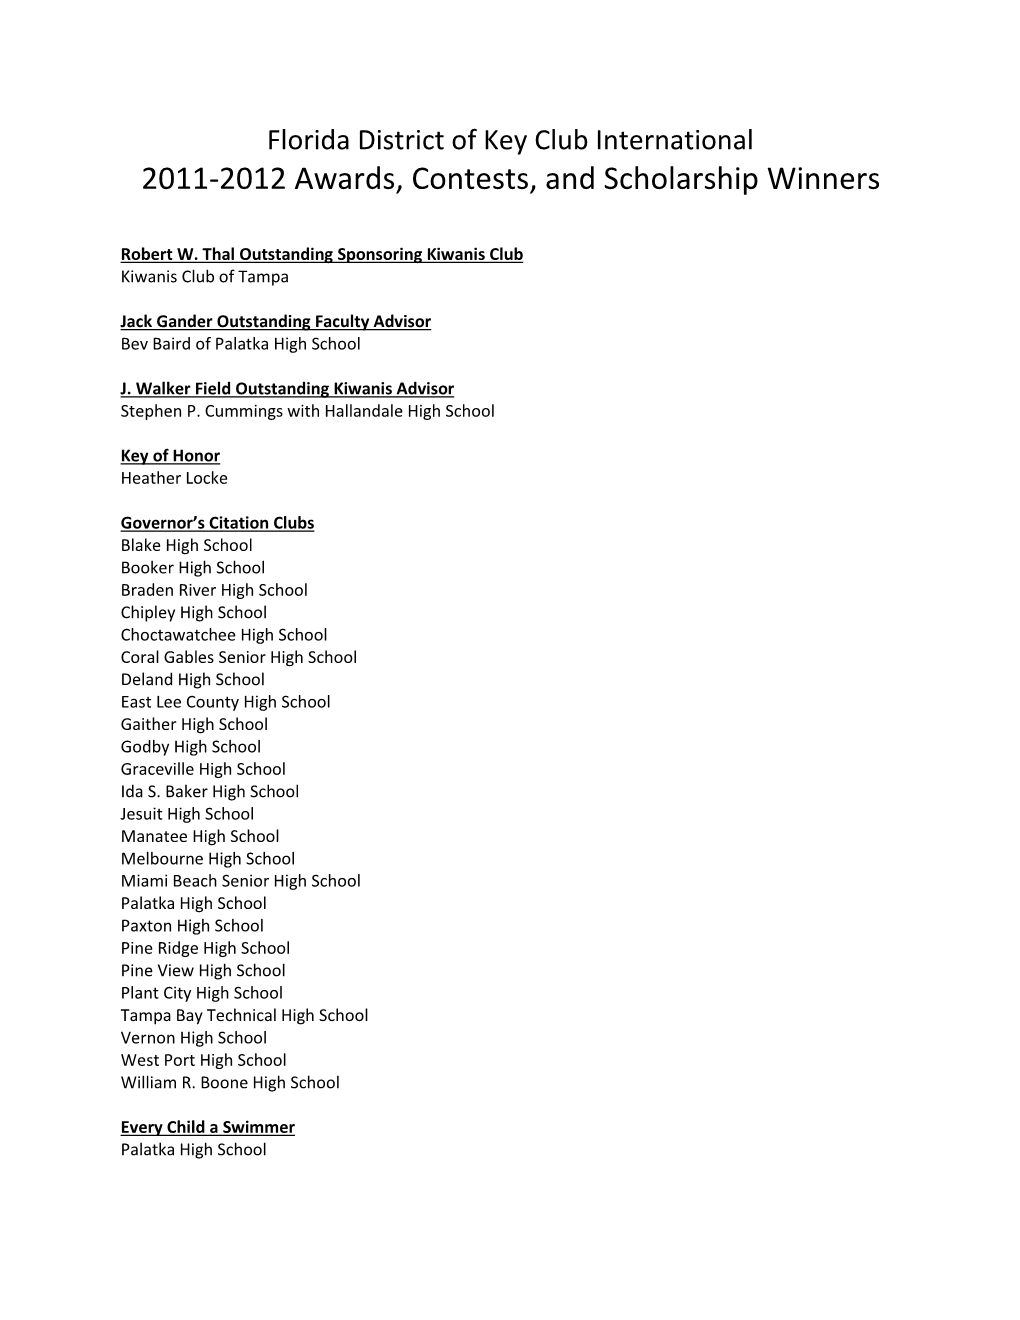 2011-2012 Awards, Contests, and Scholarship Winners